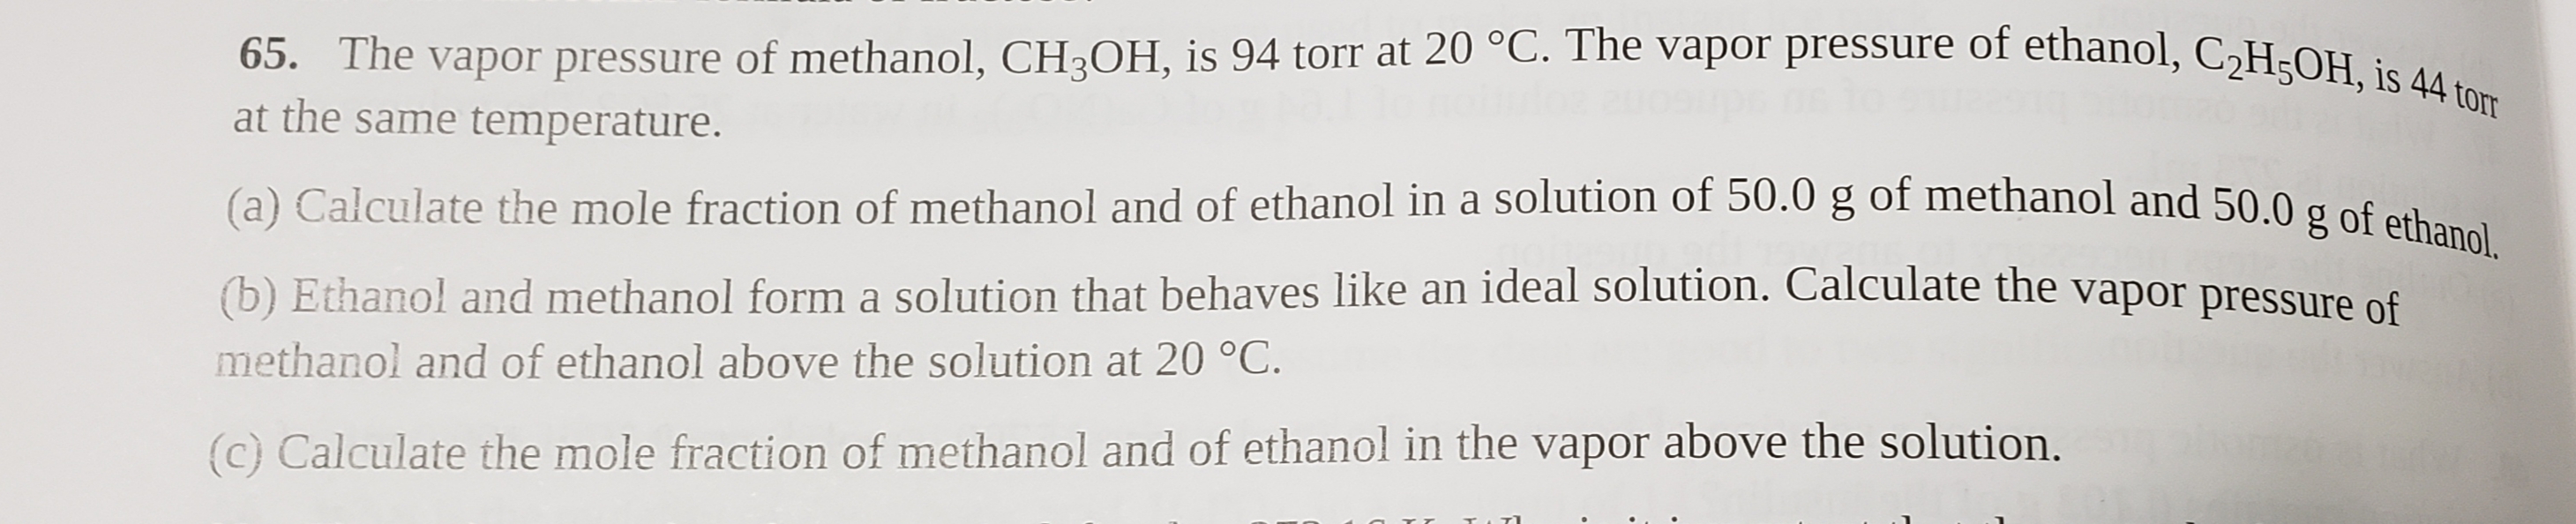 C2H;OH, is 44 torr
65. The vapor pressure of methanol, CH3OH, is 94 torr at 20 °C. The vapor pressure of ethanol, C2H5OH, is 44 torr
at the same temperature.
(a) Calculate the mole fraction of methanol and of ethanol in a solution of 50.0 g of methanol and 50.0 g of ethanol.
(b) Ethanol and methanol form a solution that behaves like an ideal solution. Calculate the vapor pressure of
methanol and of ethanol above the solution at 20 °C.
(c) Calculate the mole fraction of methanol and of ethanol in the vapor above the solution.
